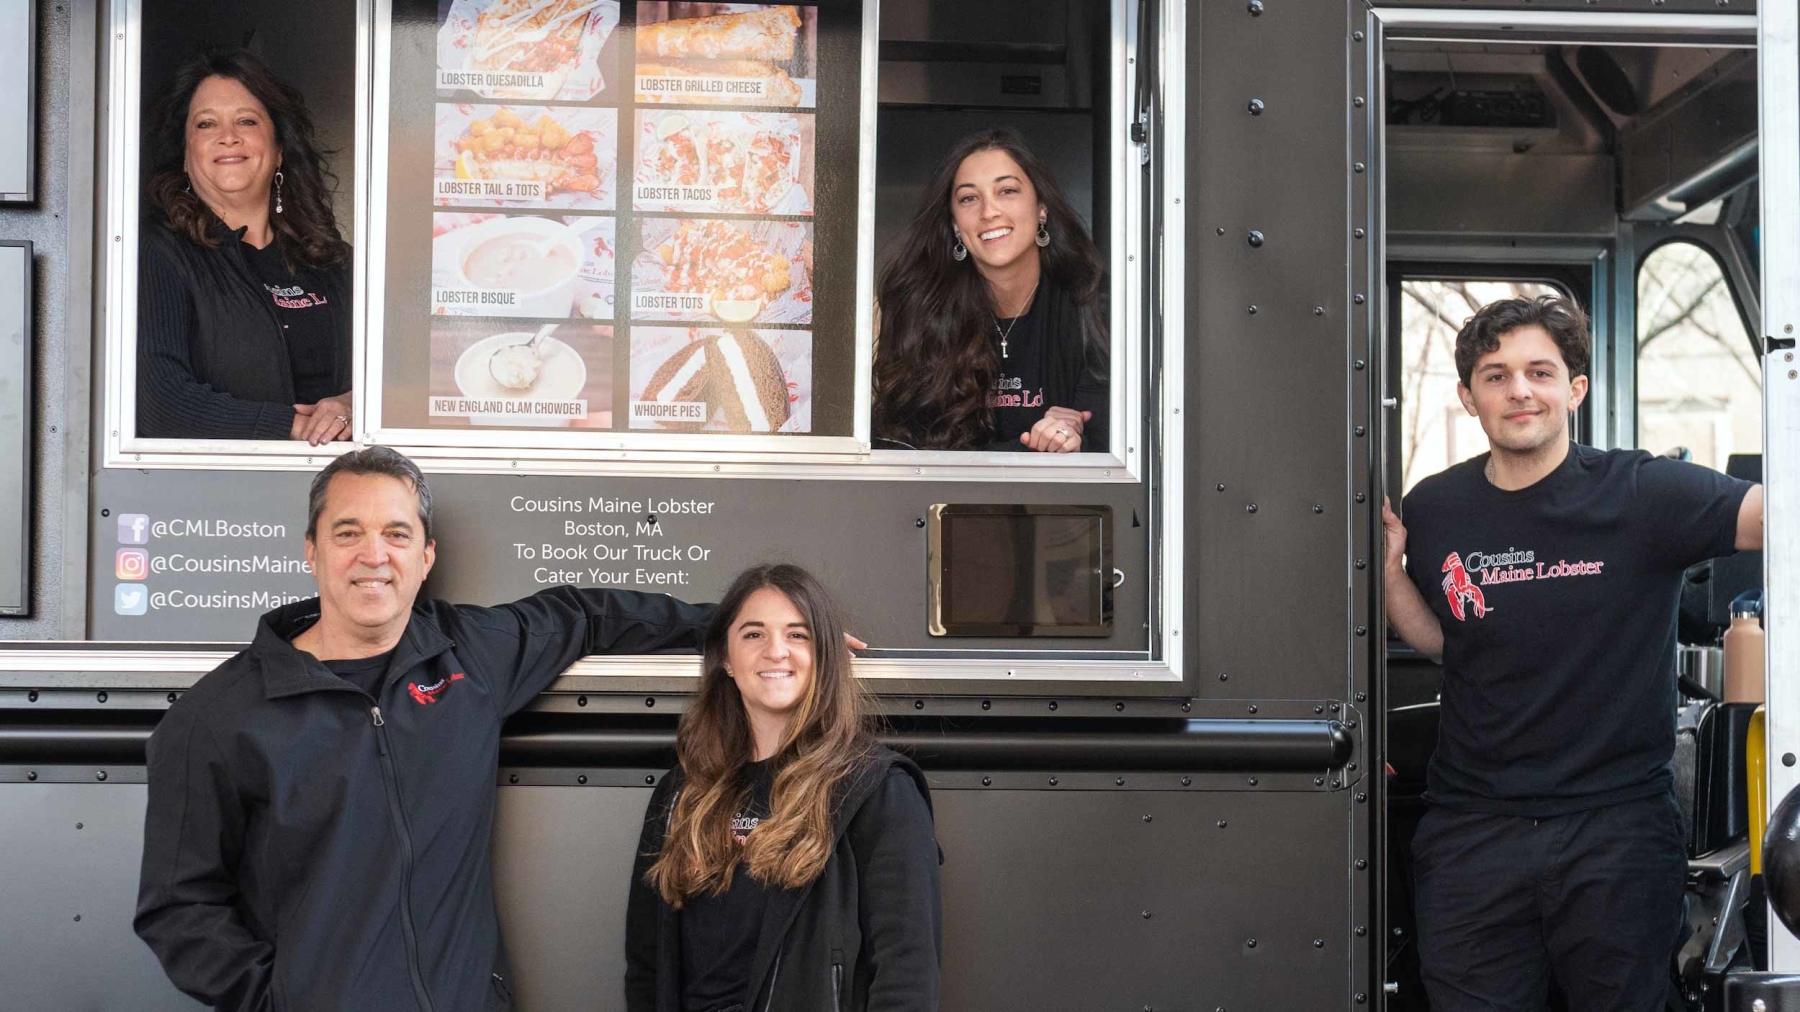 A family photos of Cousins Maine Lobster Boston owners standing inside and outside their food truck.